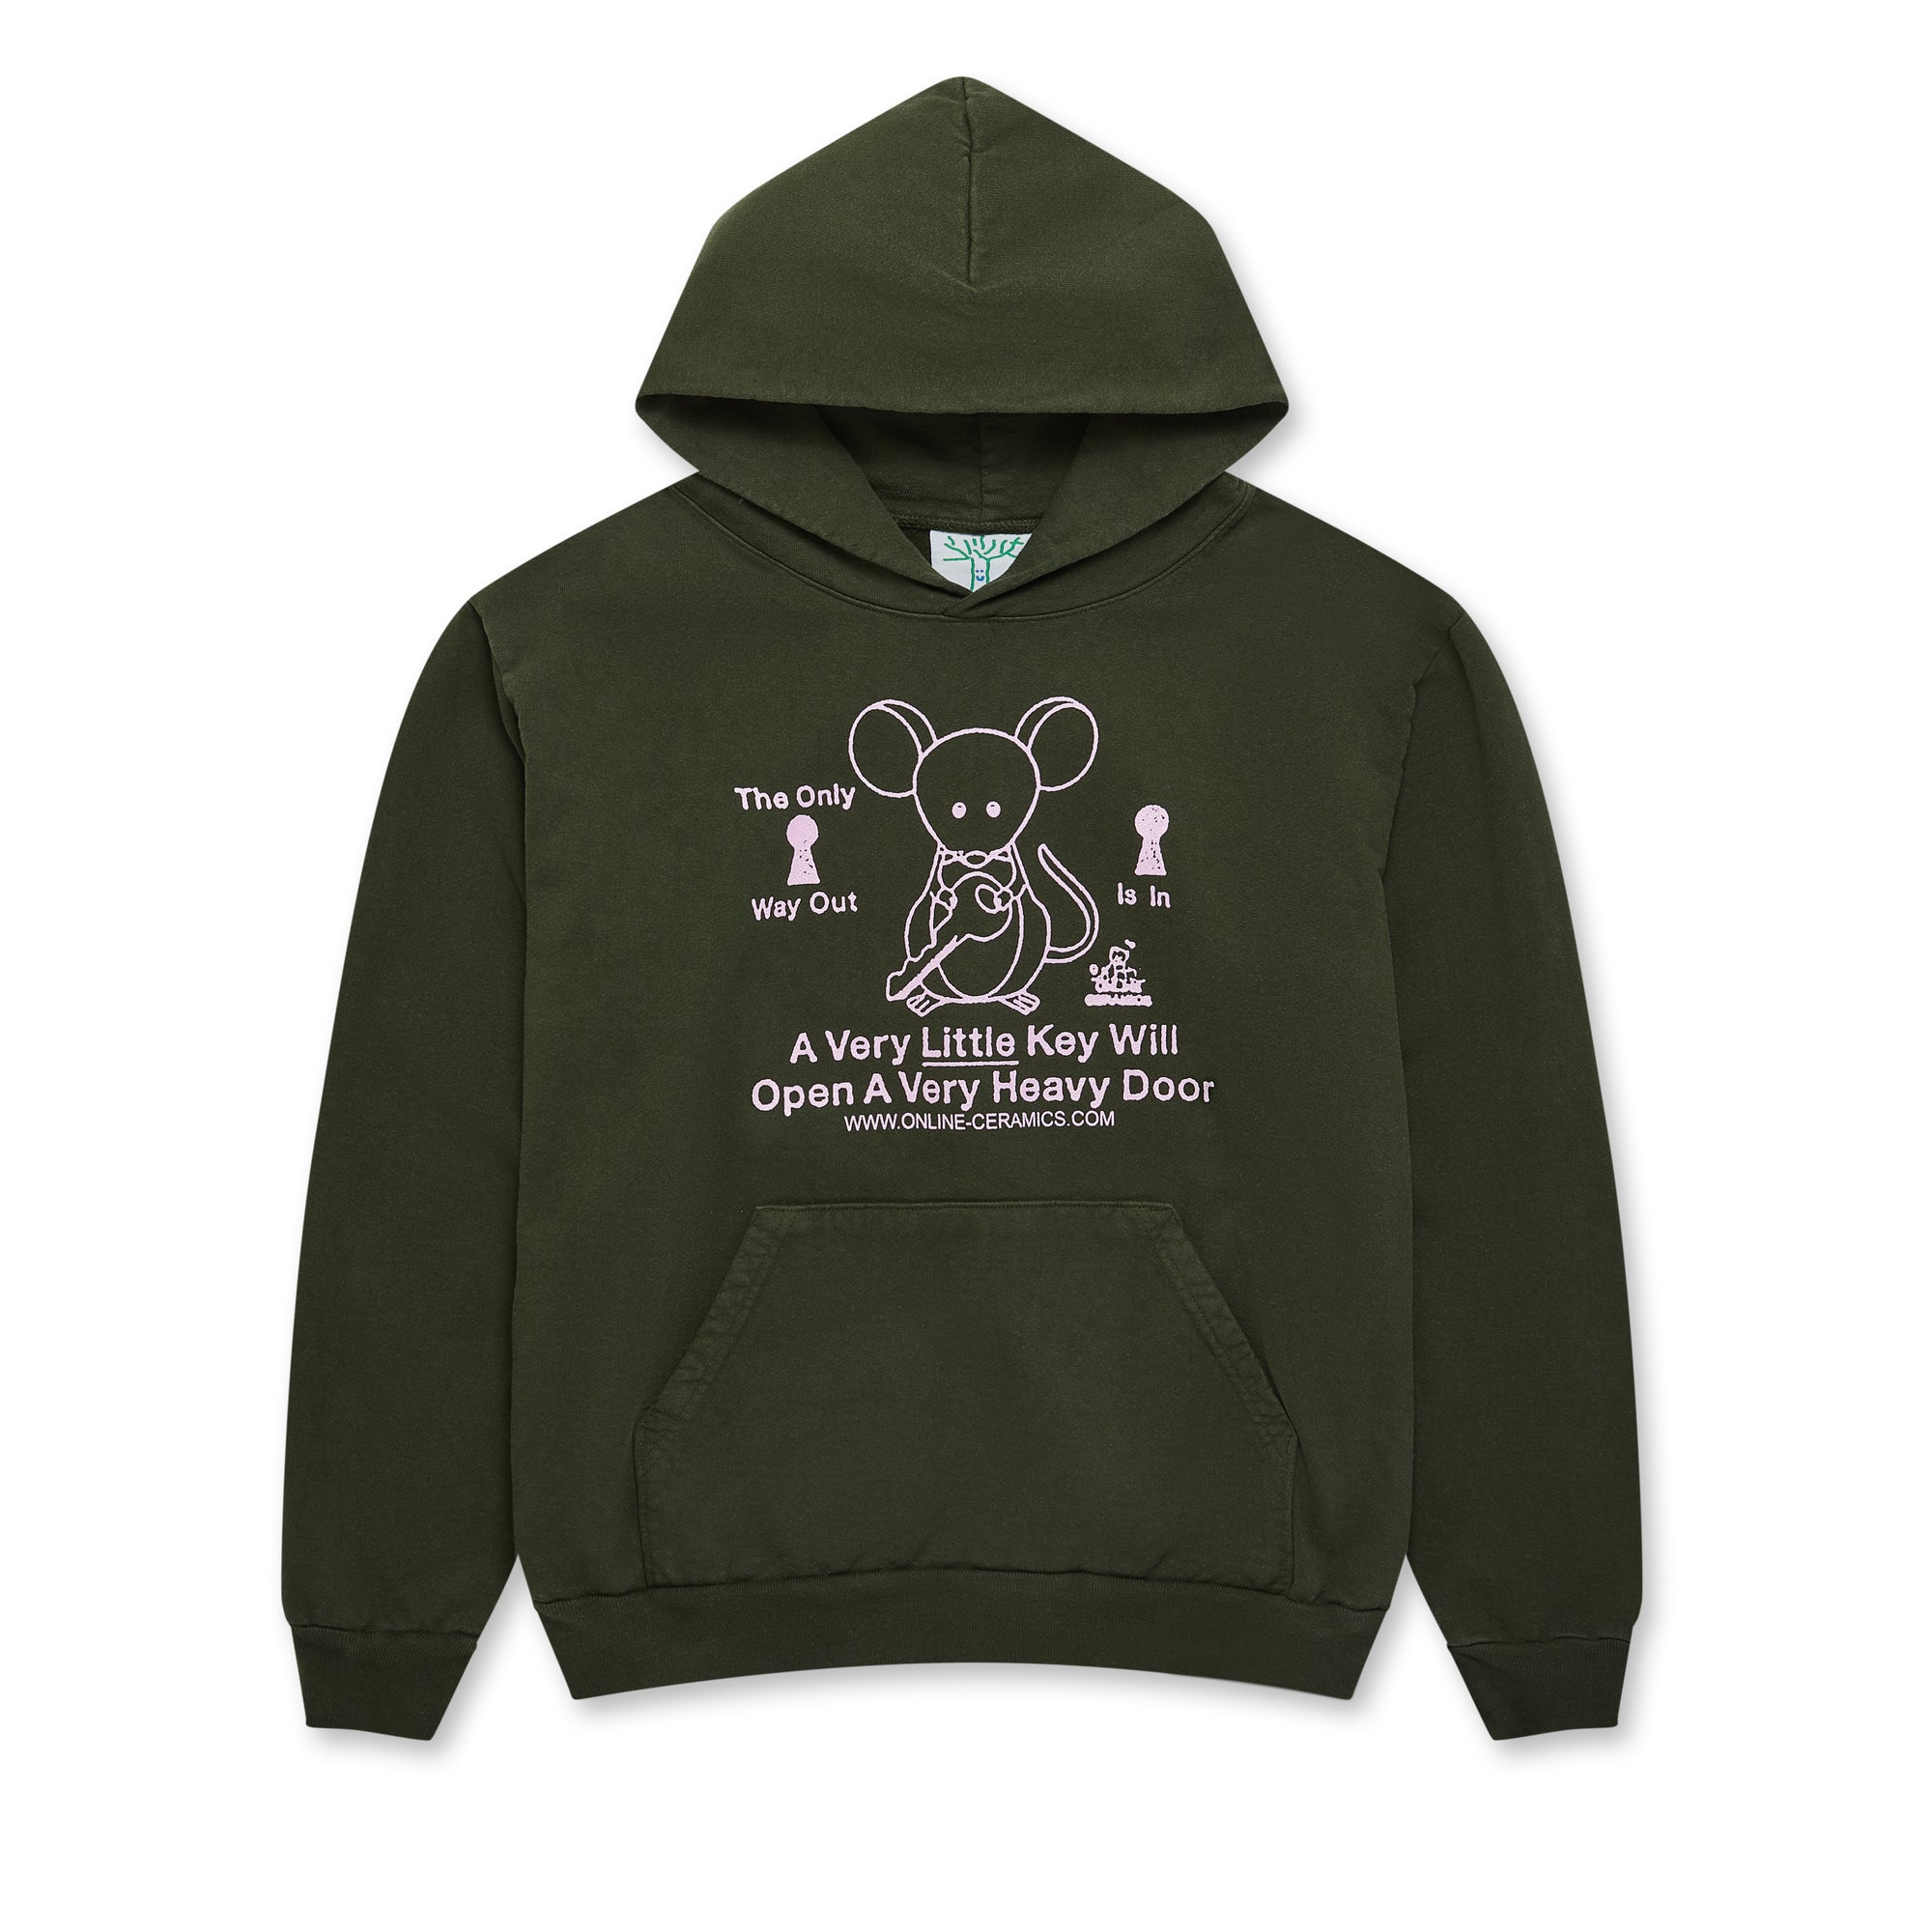 Online Ceramics - The Only Way Out Is In Hoodie - (Green) view 1